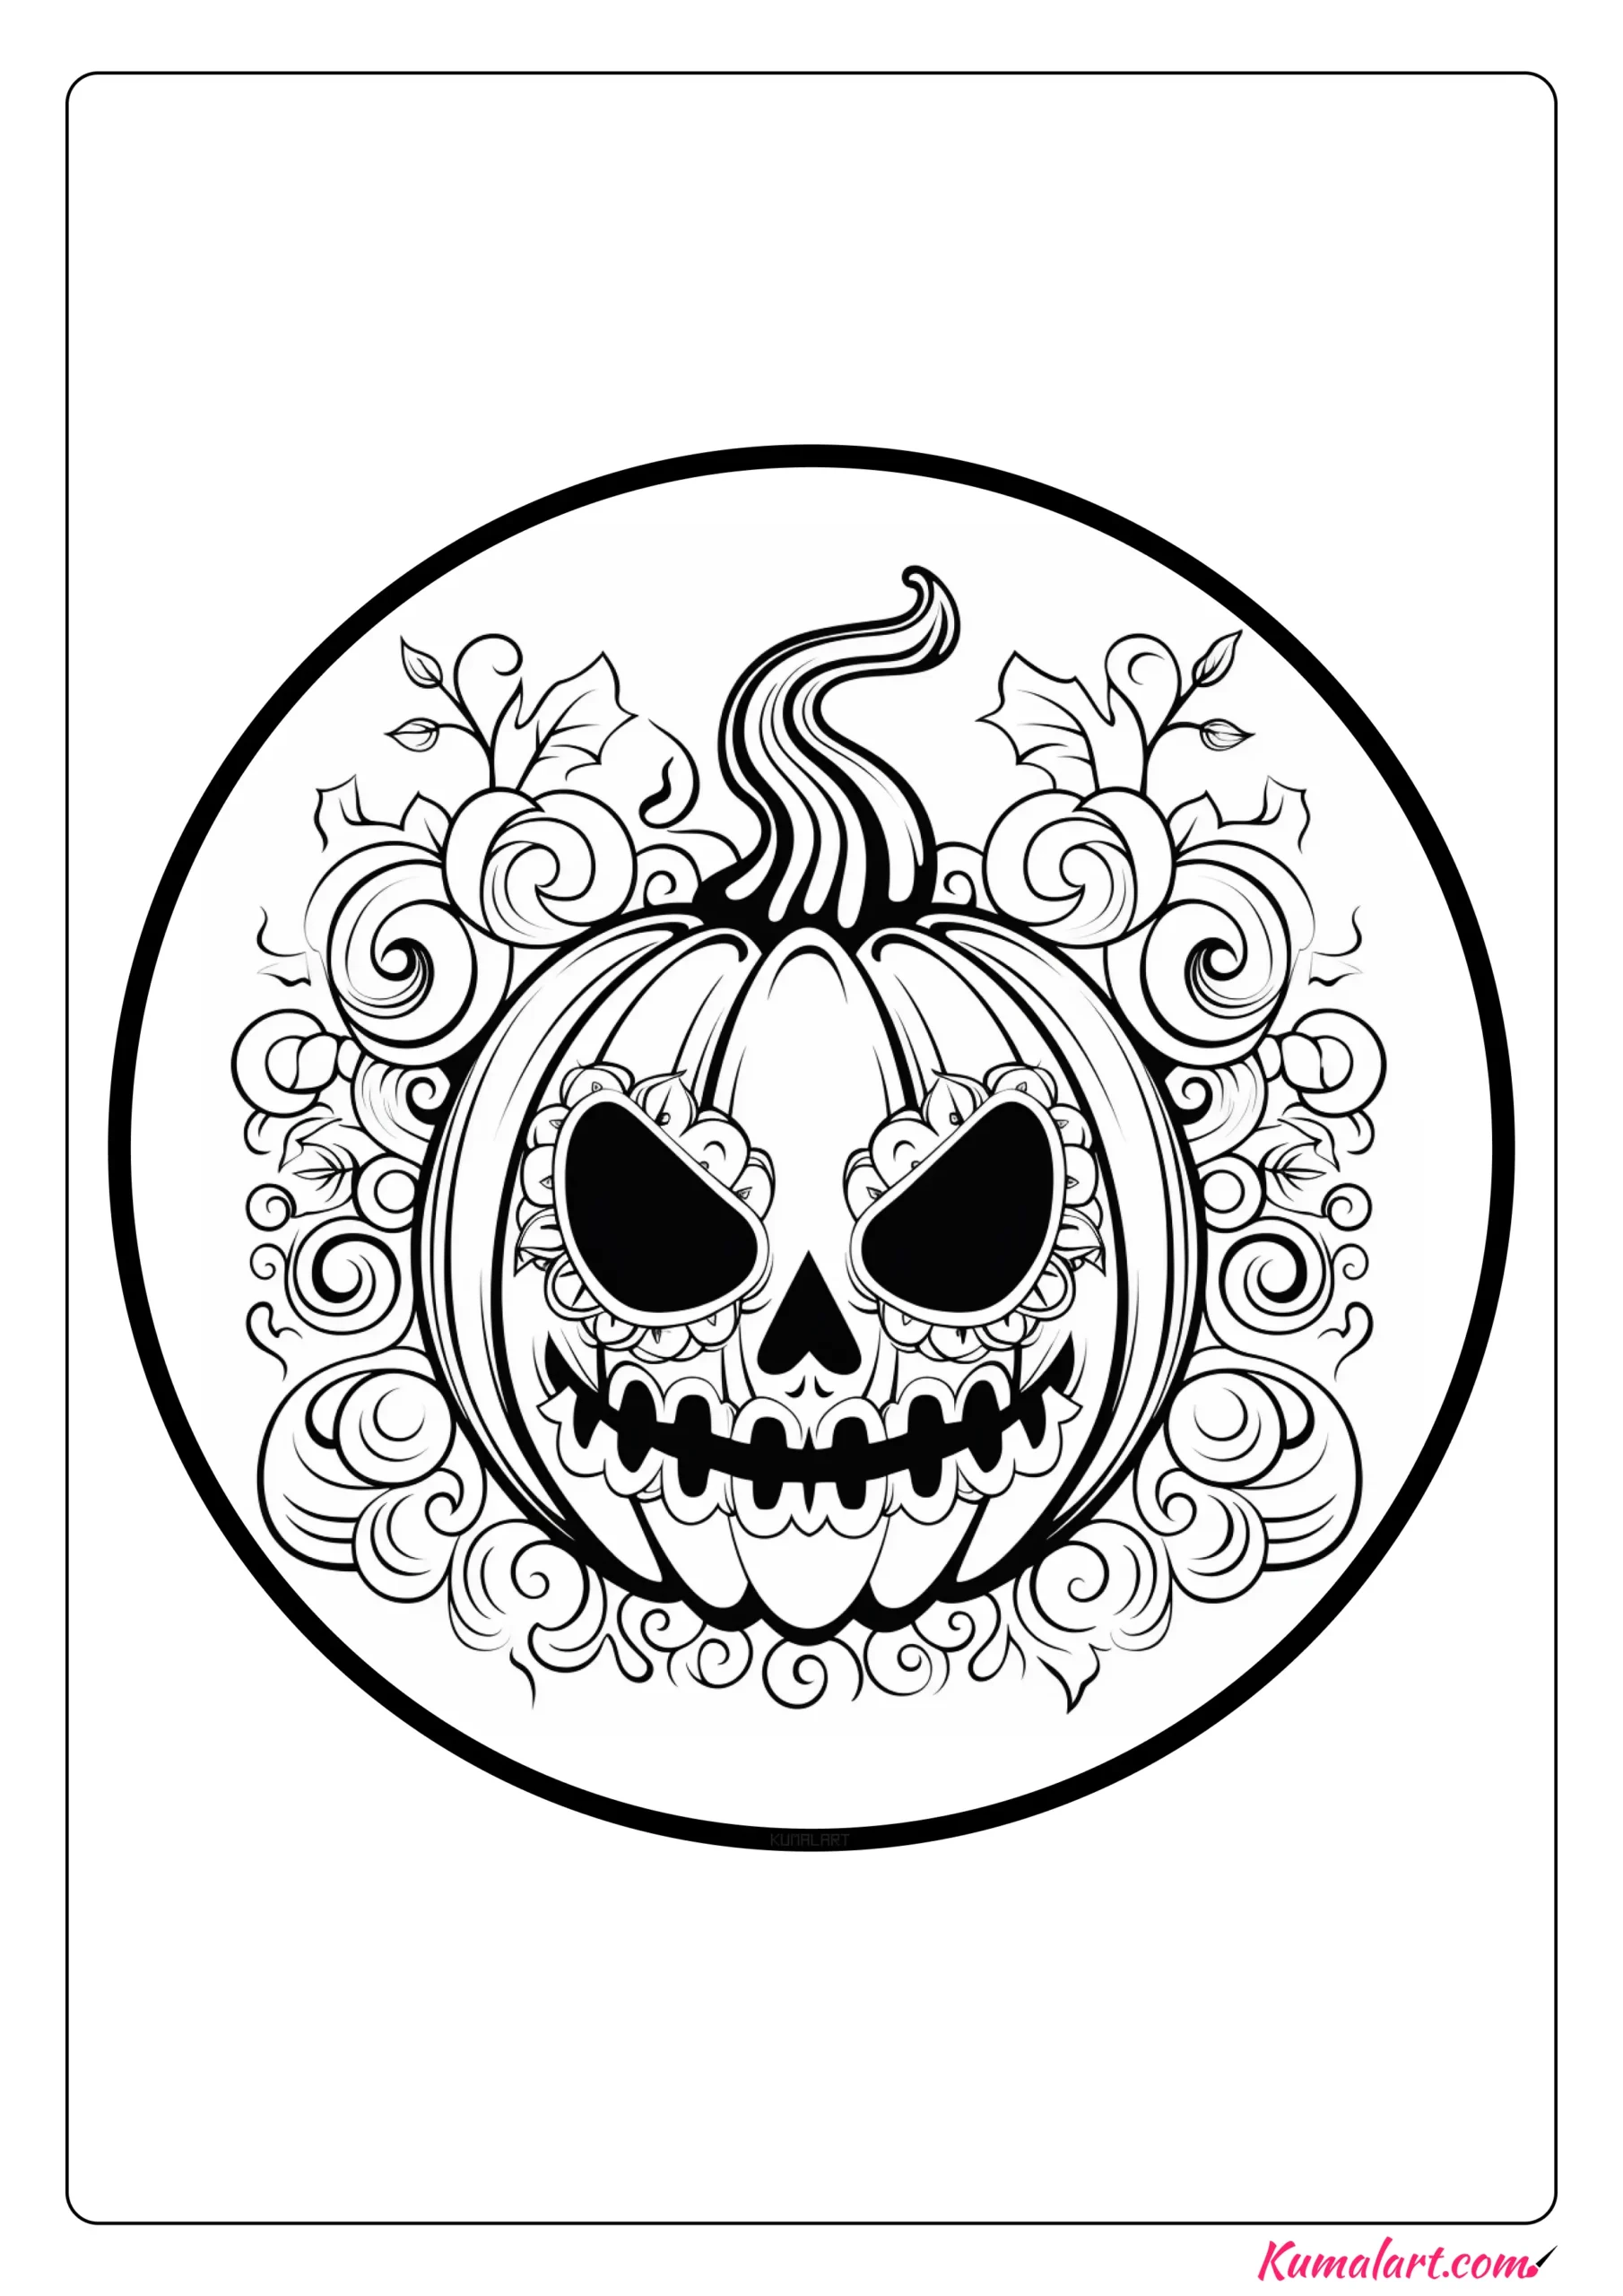 Ðeerie scary pumpkin coloring pages explore download and color